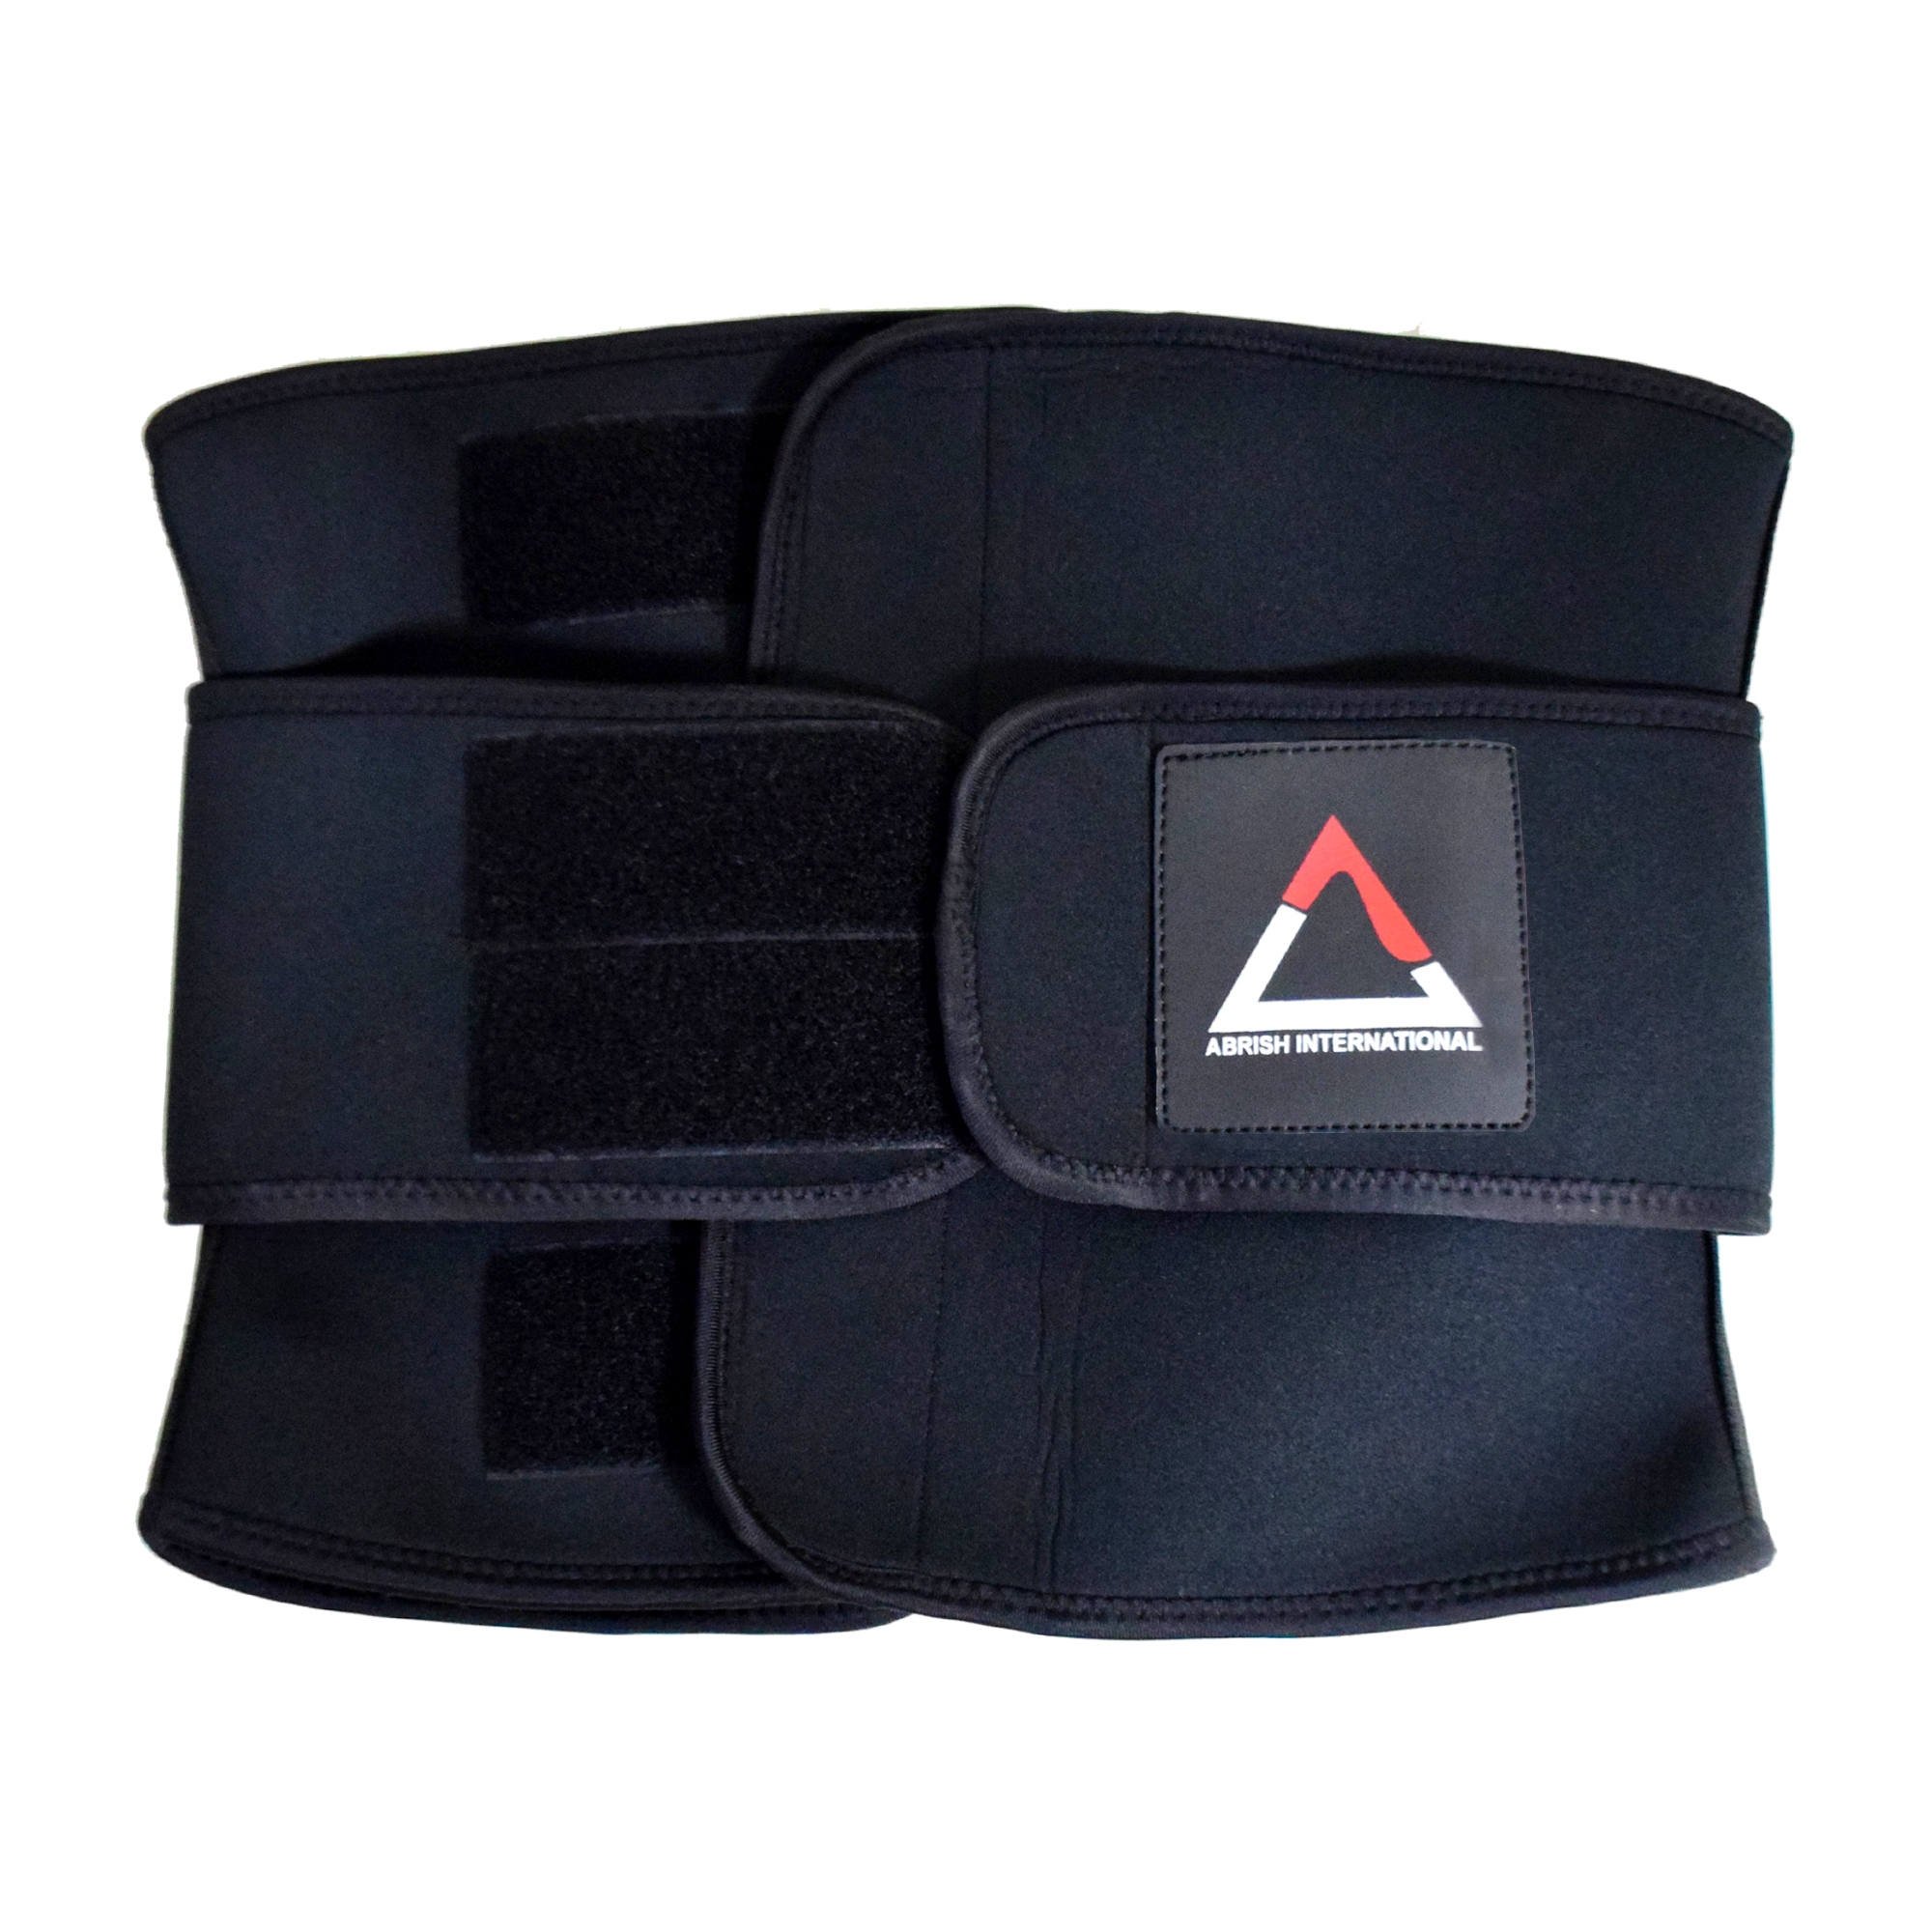 Black Neoprene Abdominal Support with Double Valcro